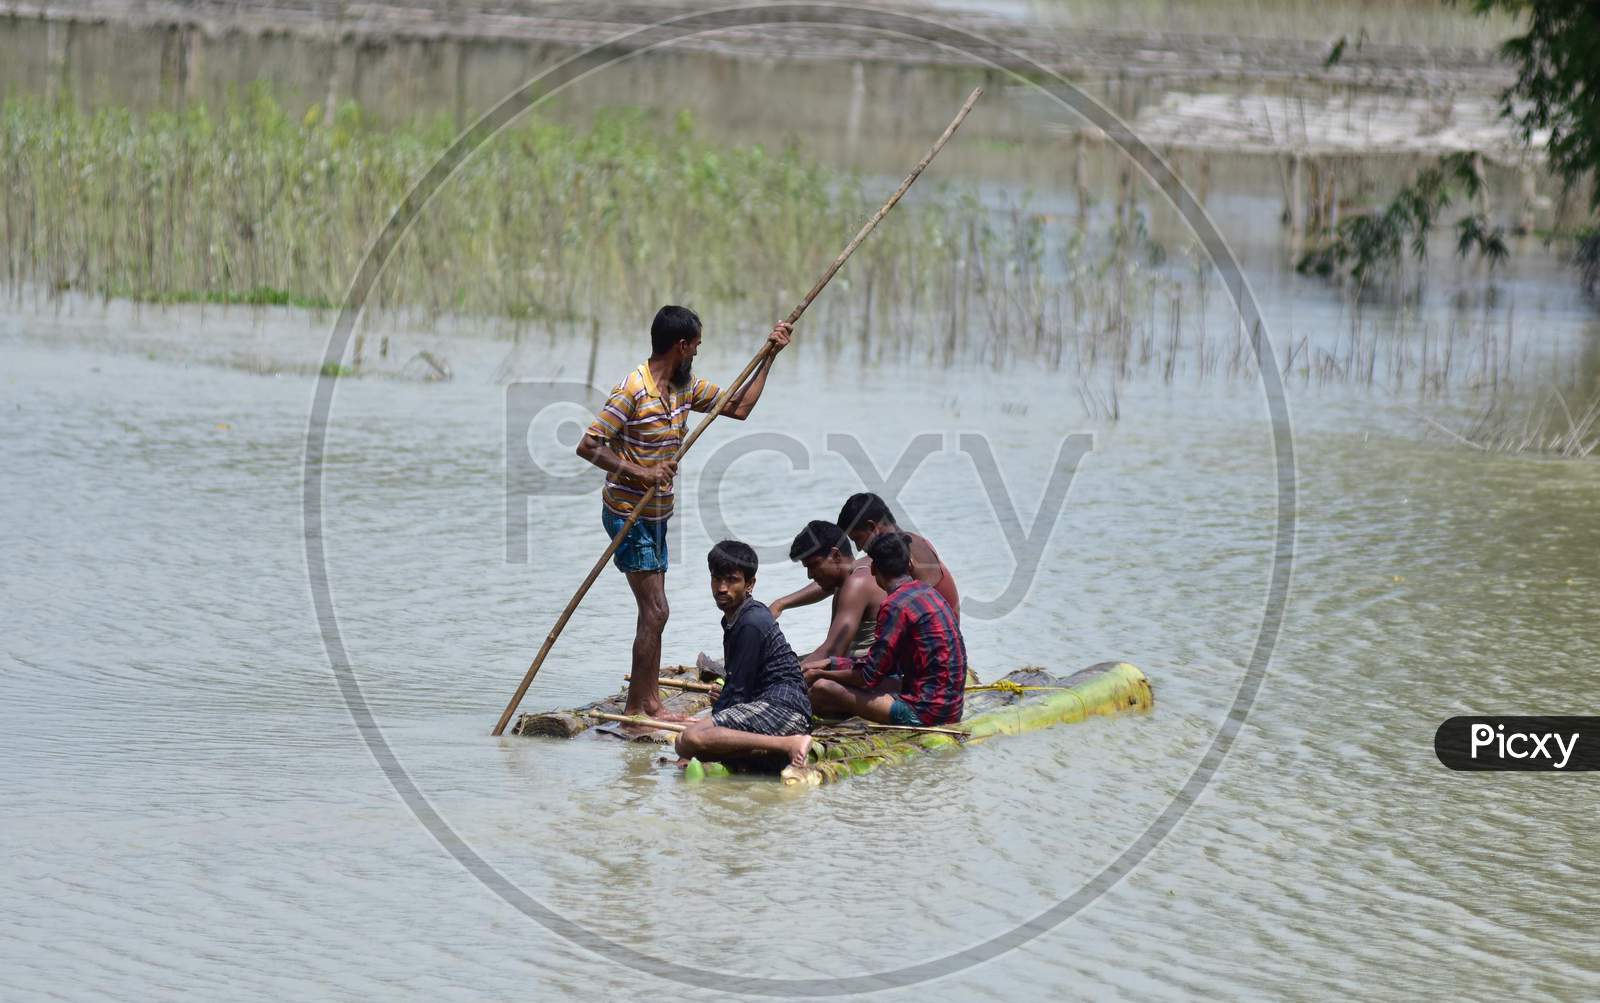 Villagers Row A Makeshift Raft Through A Flooded Field  At The Flood-Affected Laokhowa Wildlife Sanctuary In Nagaon District Of Assam On July 25, 2020.